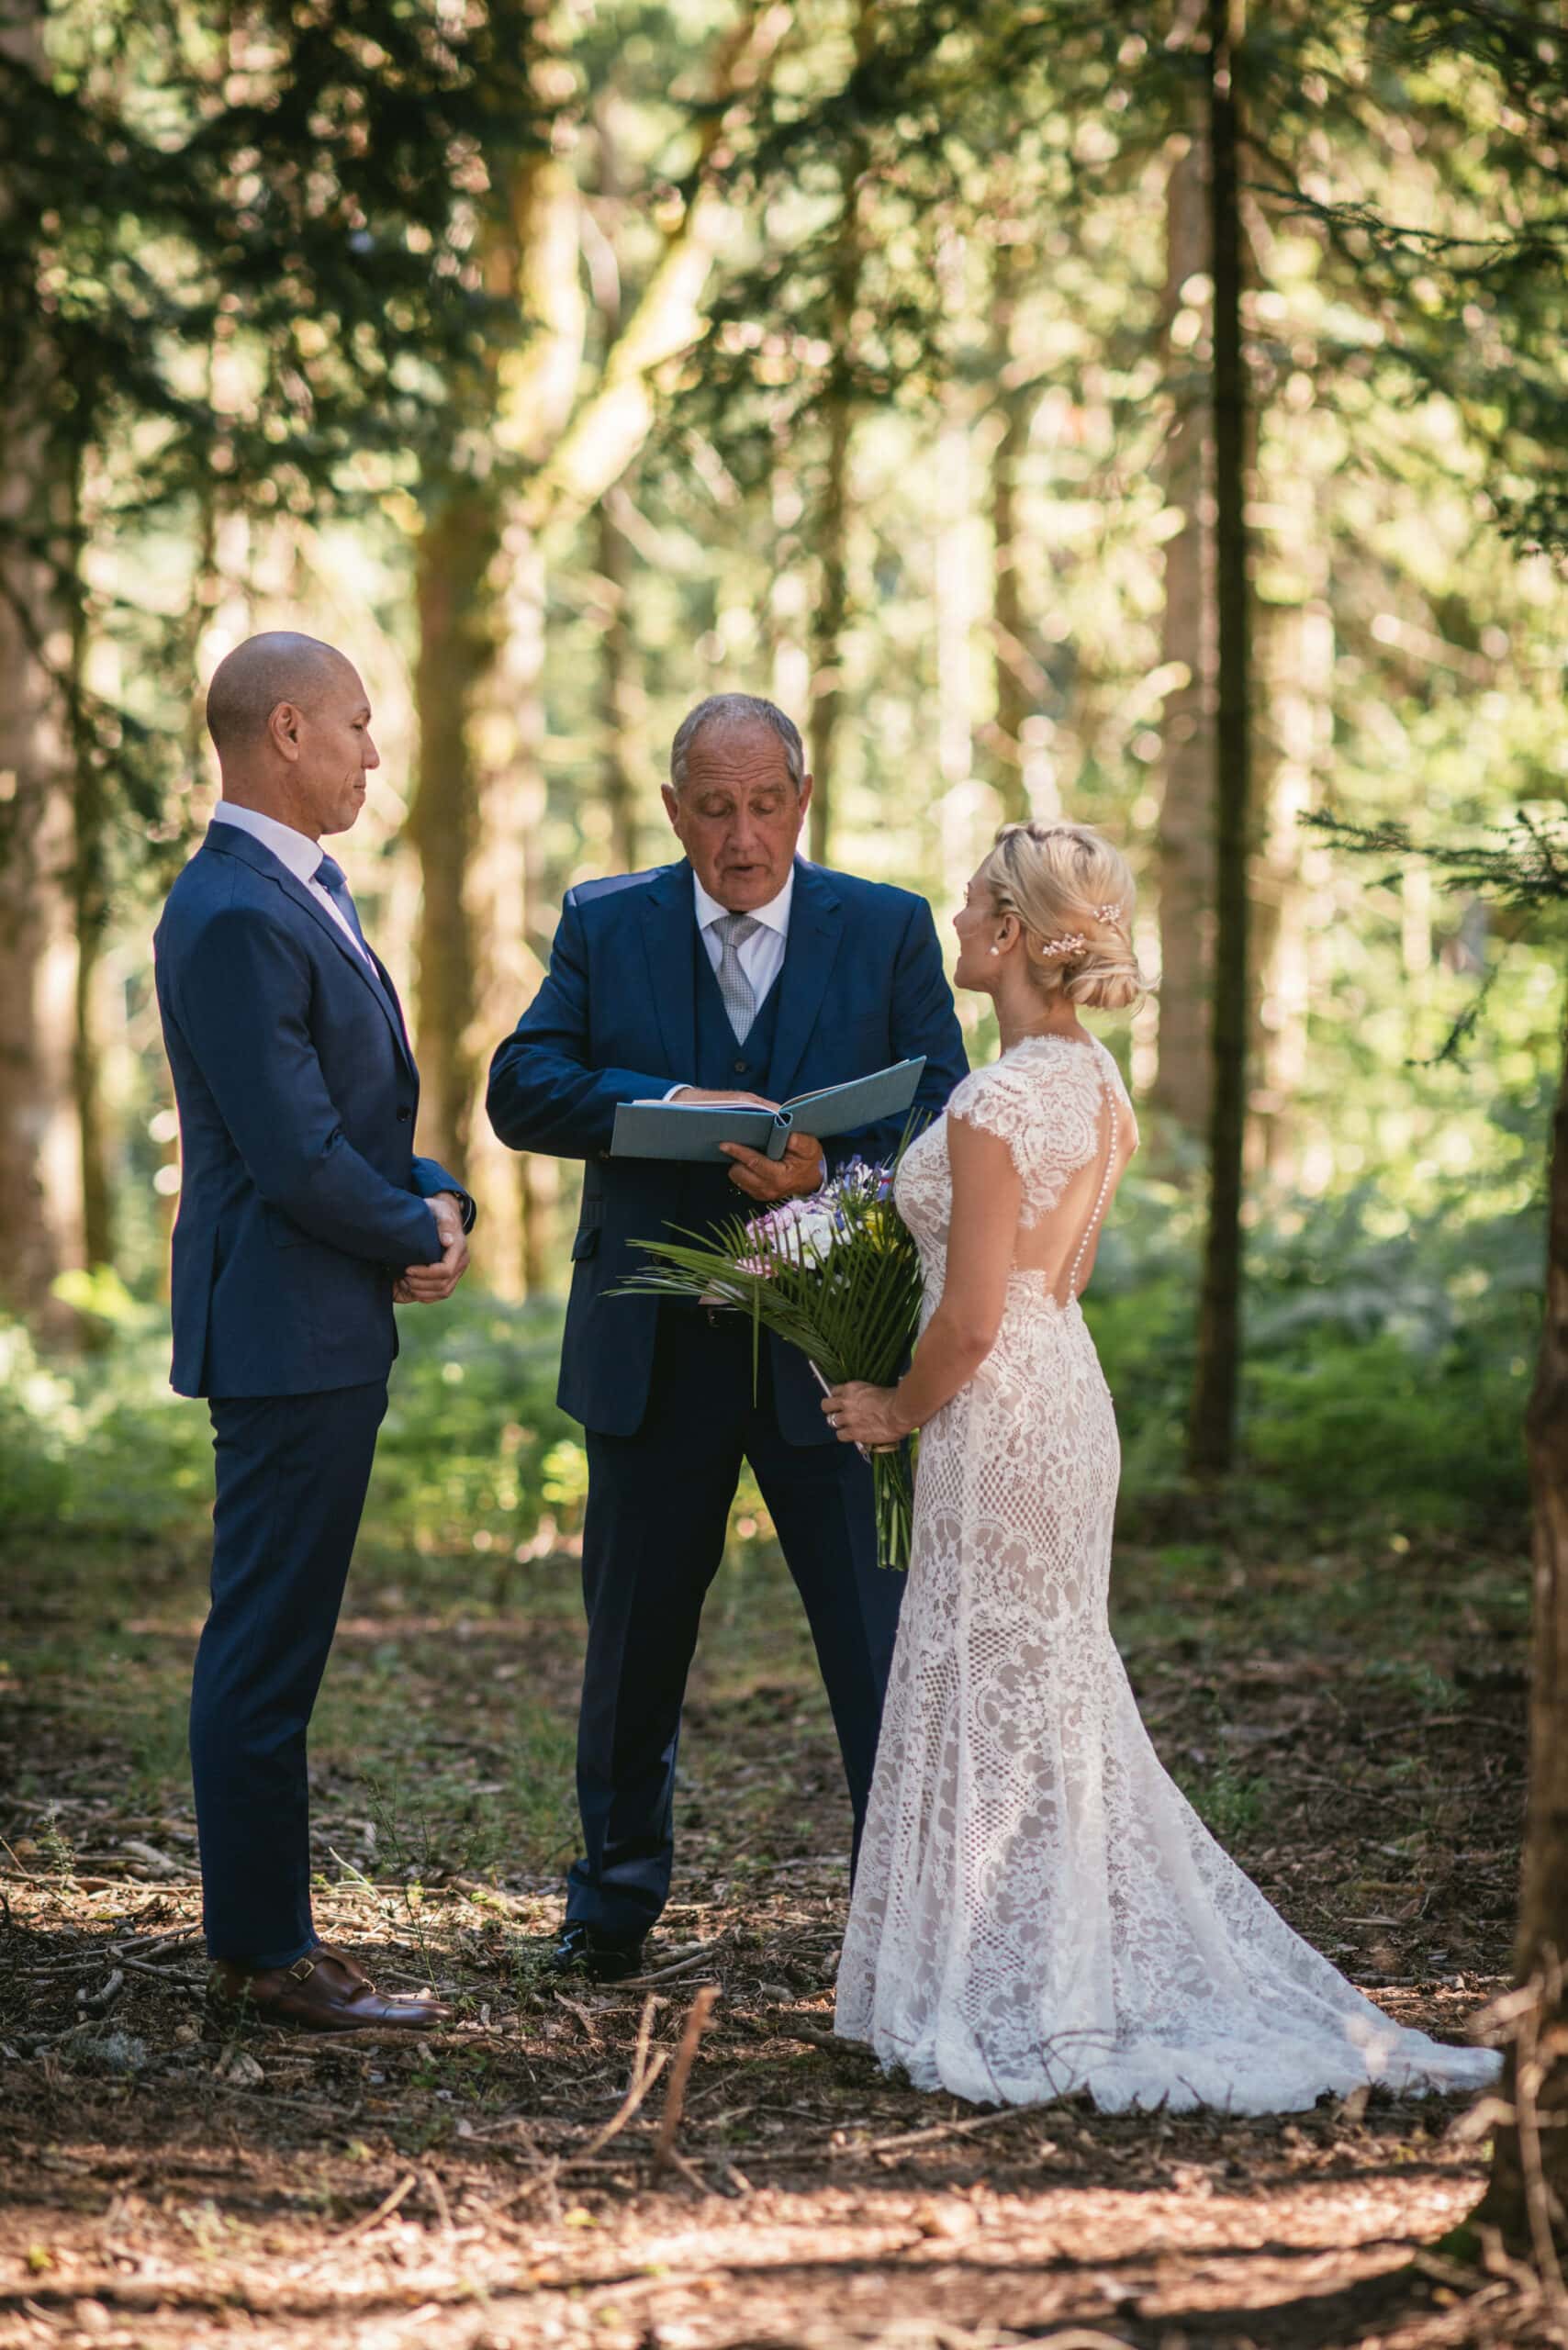 Elopement ceremony in a forest in Central France